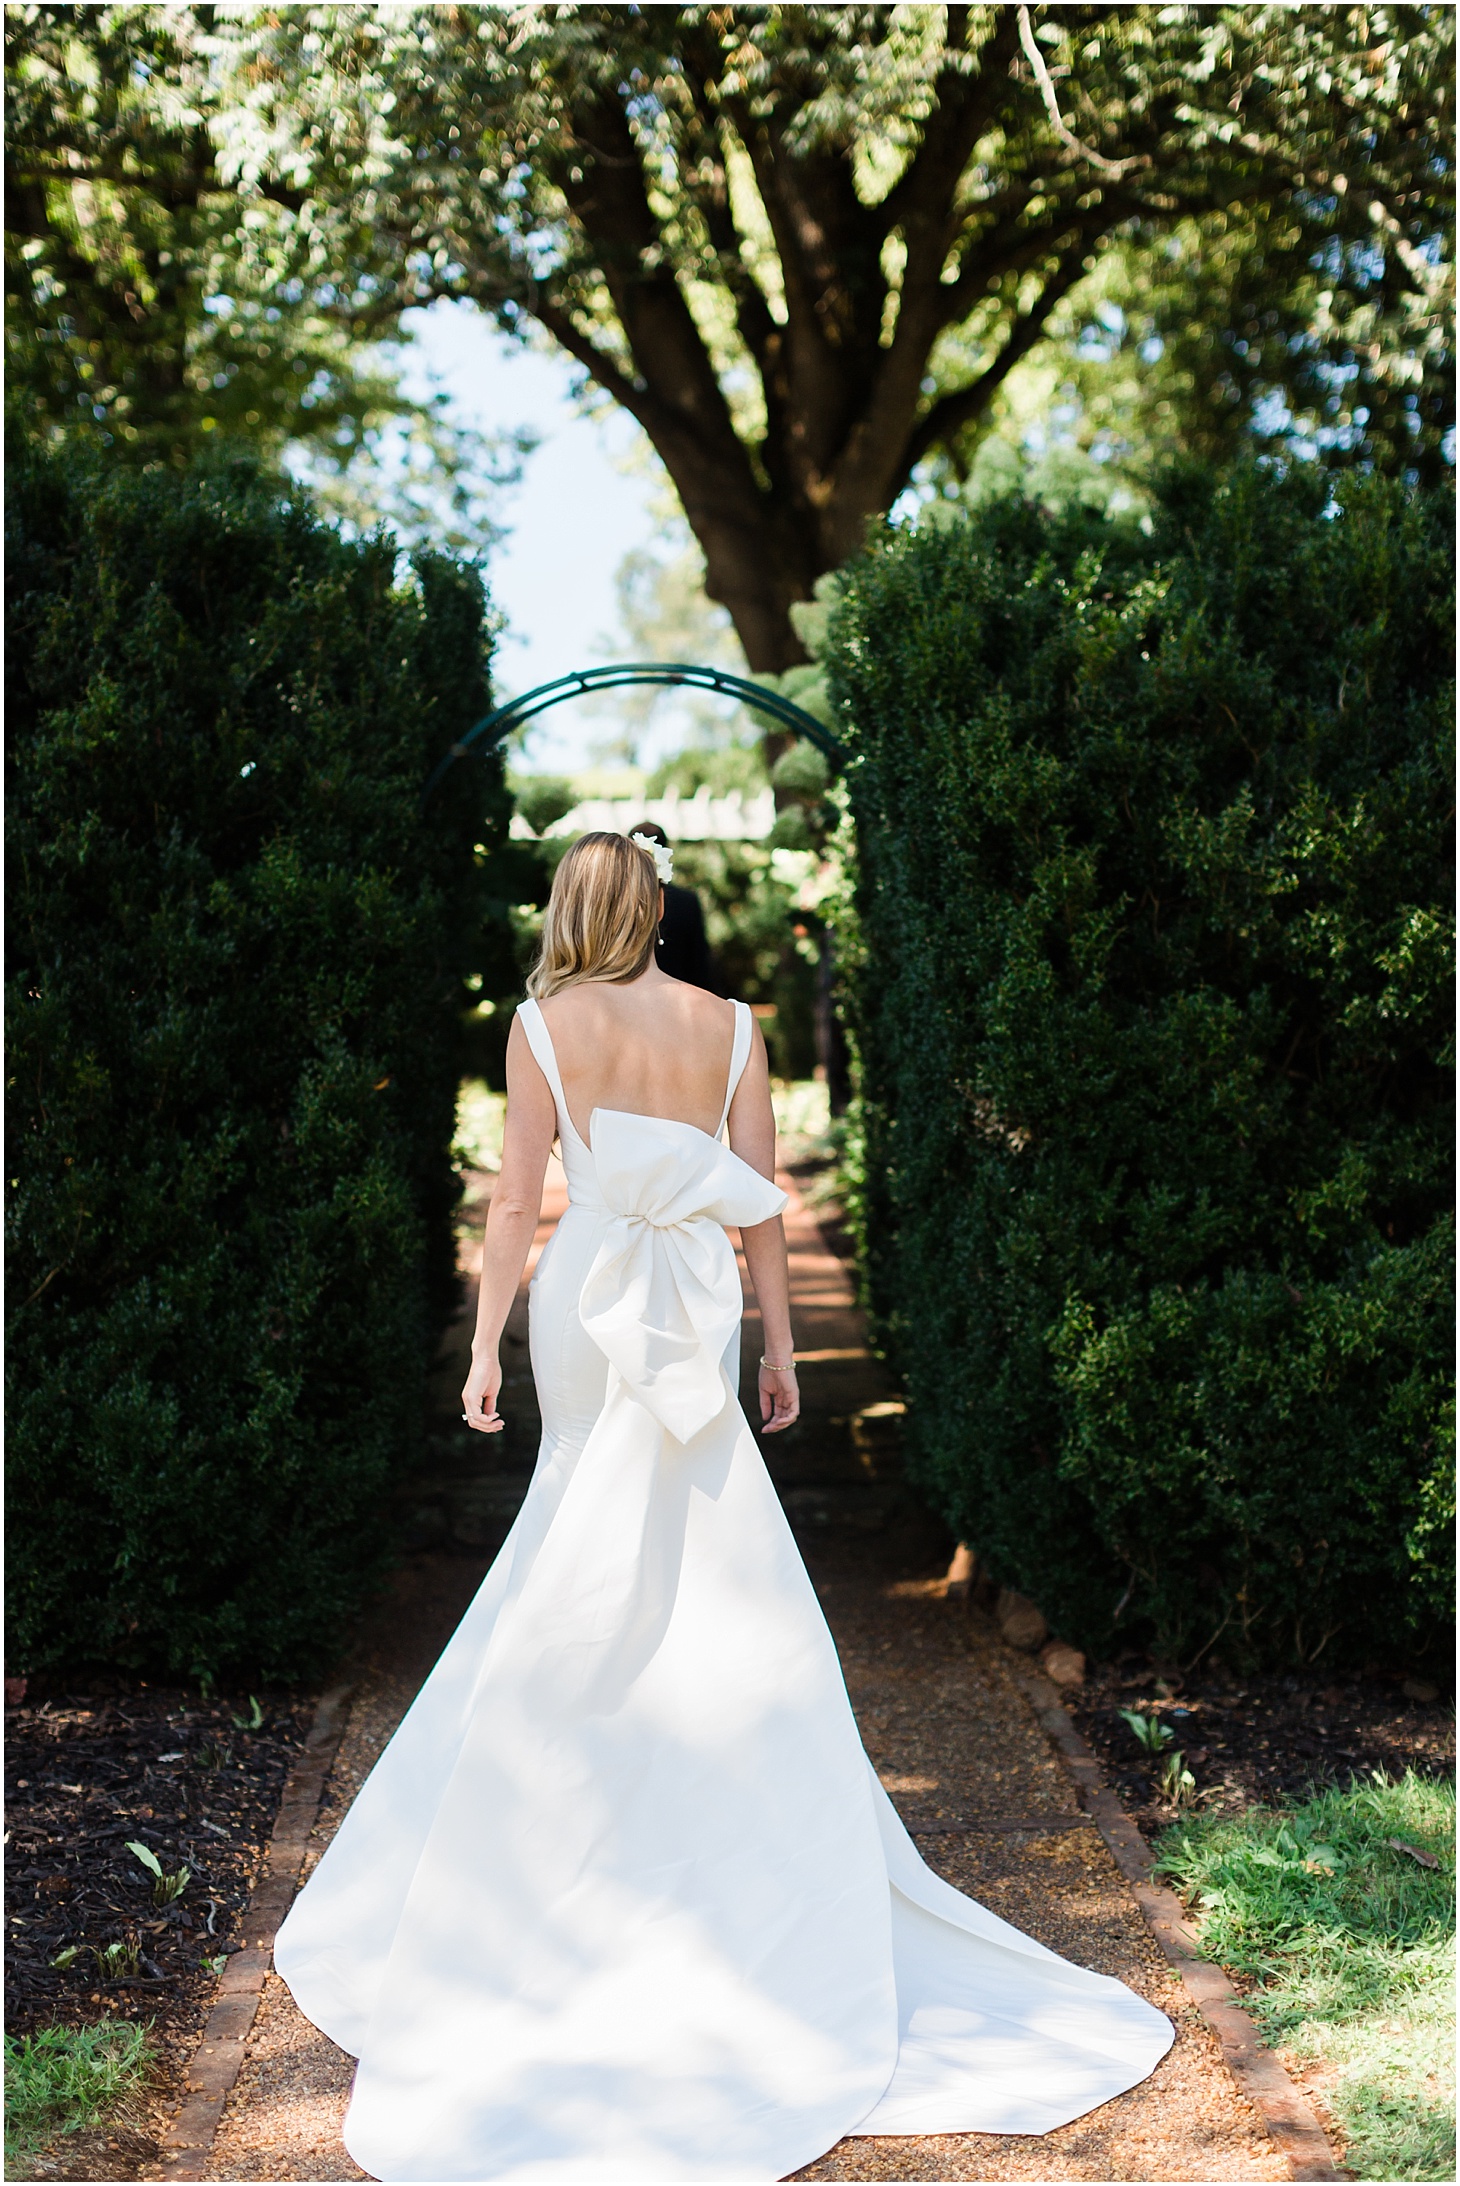 First Look at the Inn at Willow Grove, Green and White Summer Wedding at The Inn at Willow Grove, Ceremony at St. Isidore the Farmer Catholic Church, Sarah Bradshaw Photography, DC Wedding Photographer